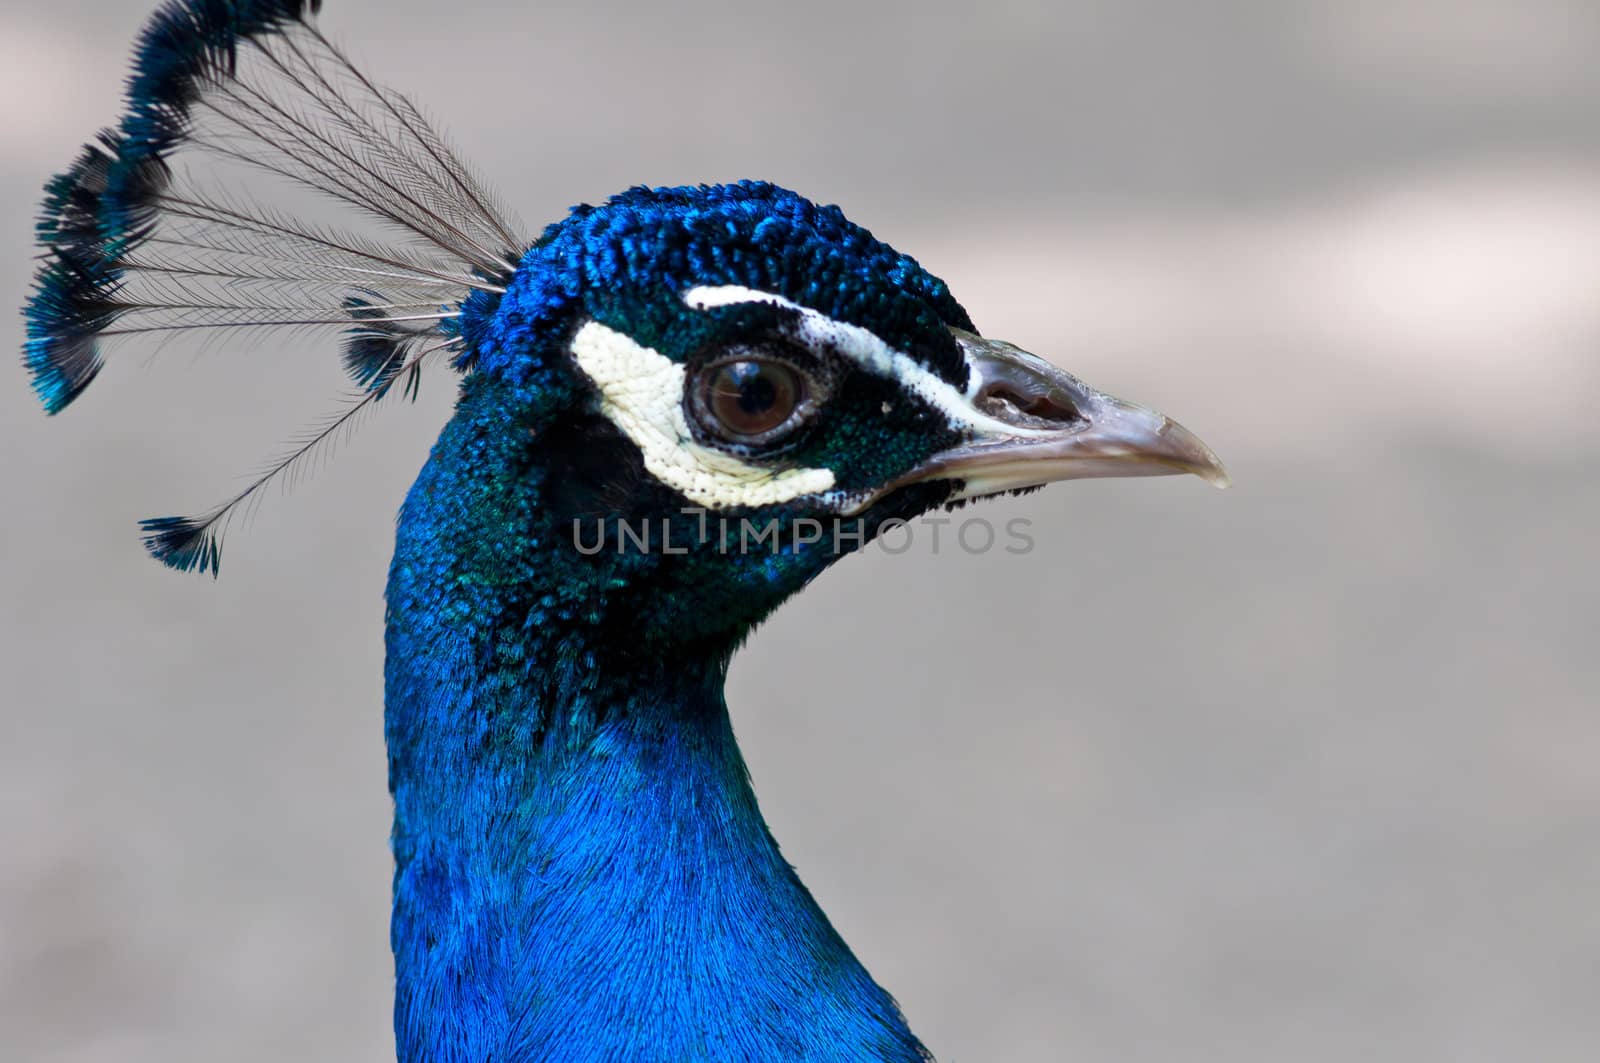 Picture of a beautiful male peacock with colorful tail on display.